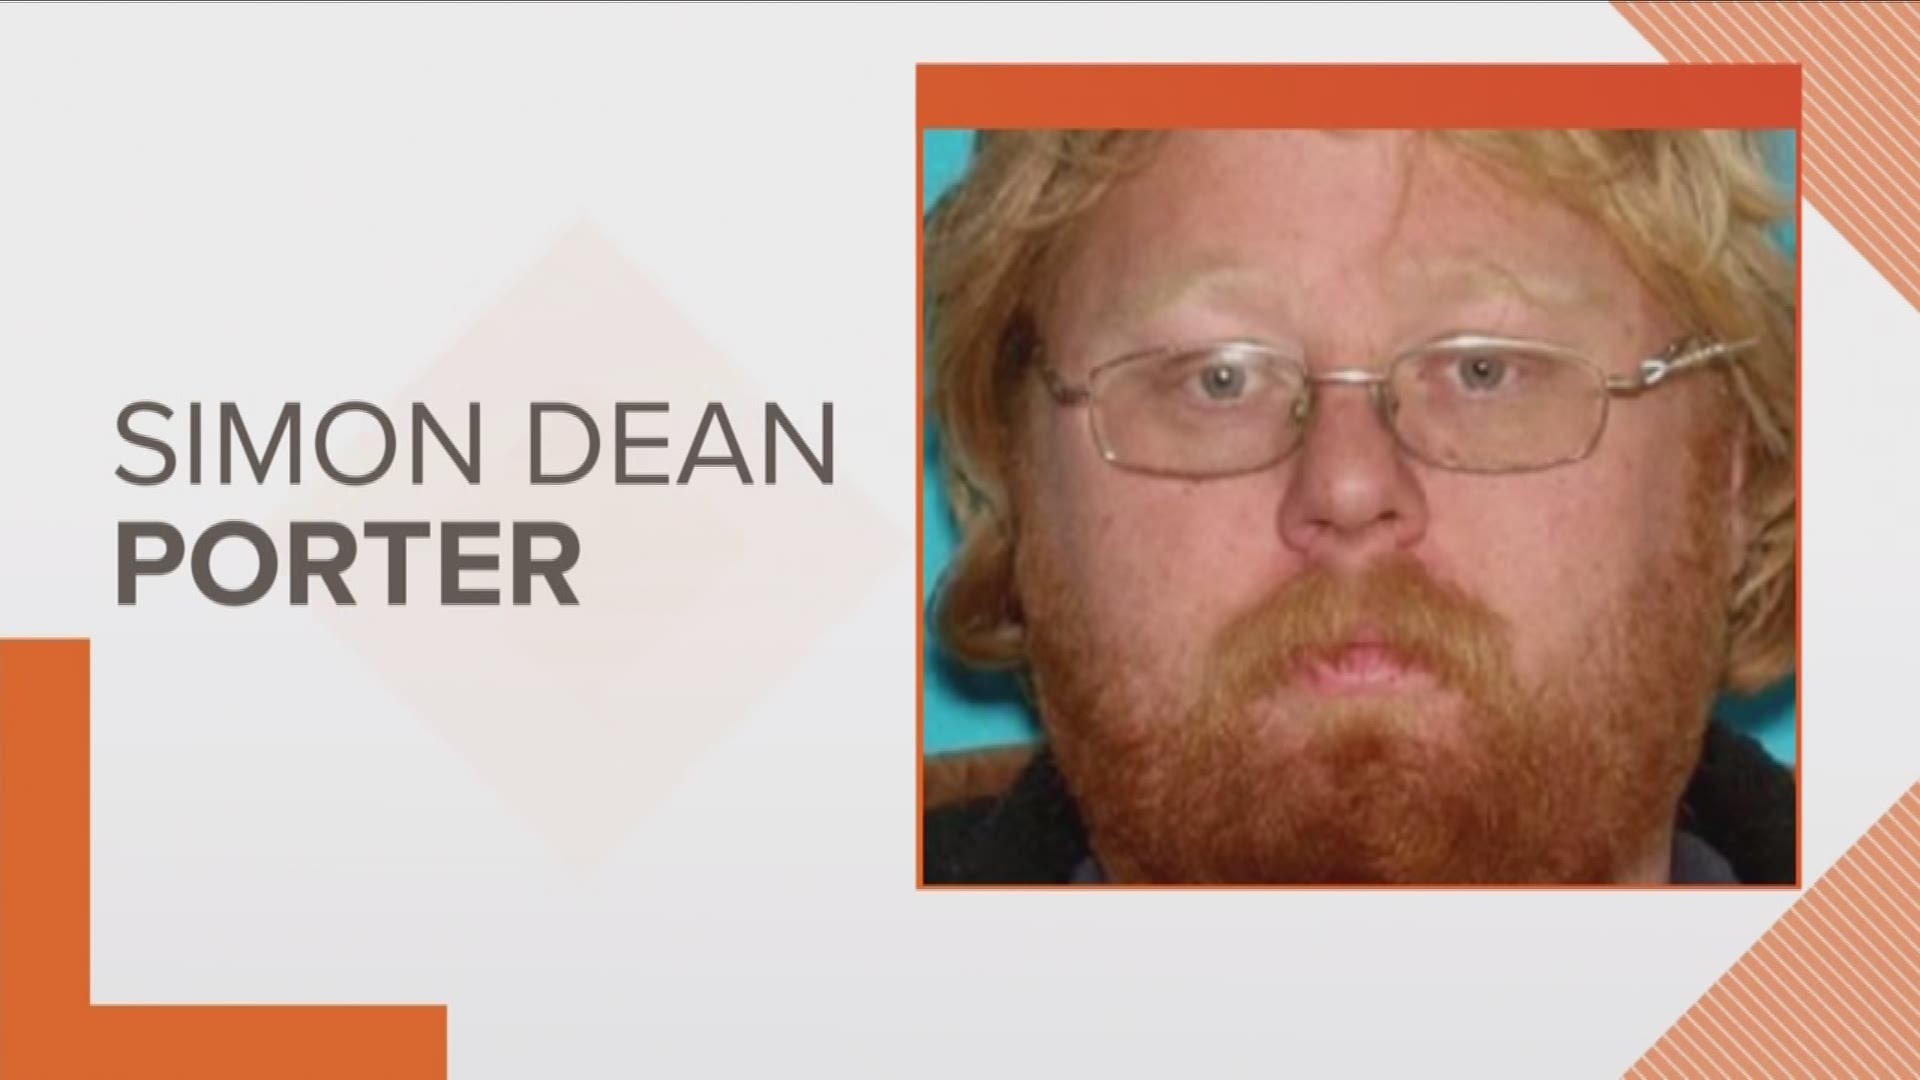 33-year-old Simon Dean Porter is wanted on a charge of aggravated rape of a child. Police say he may be driving a green Chevrolet S-10 pick-up truck with a red tailgate.